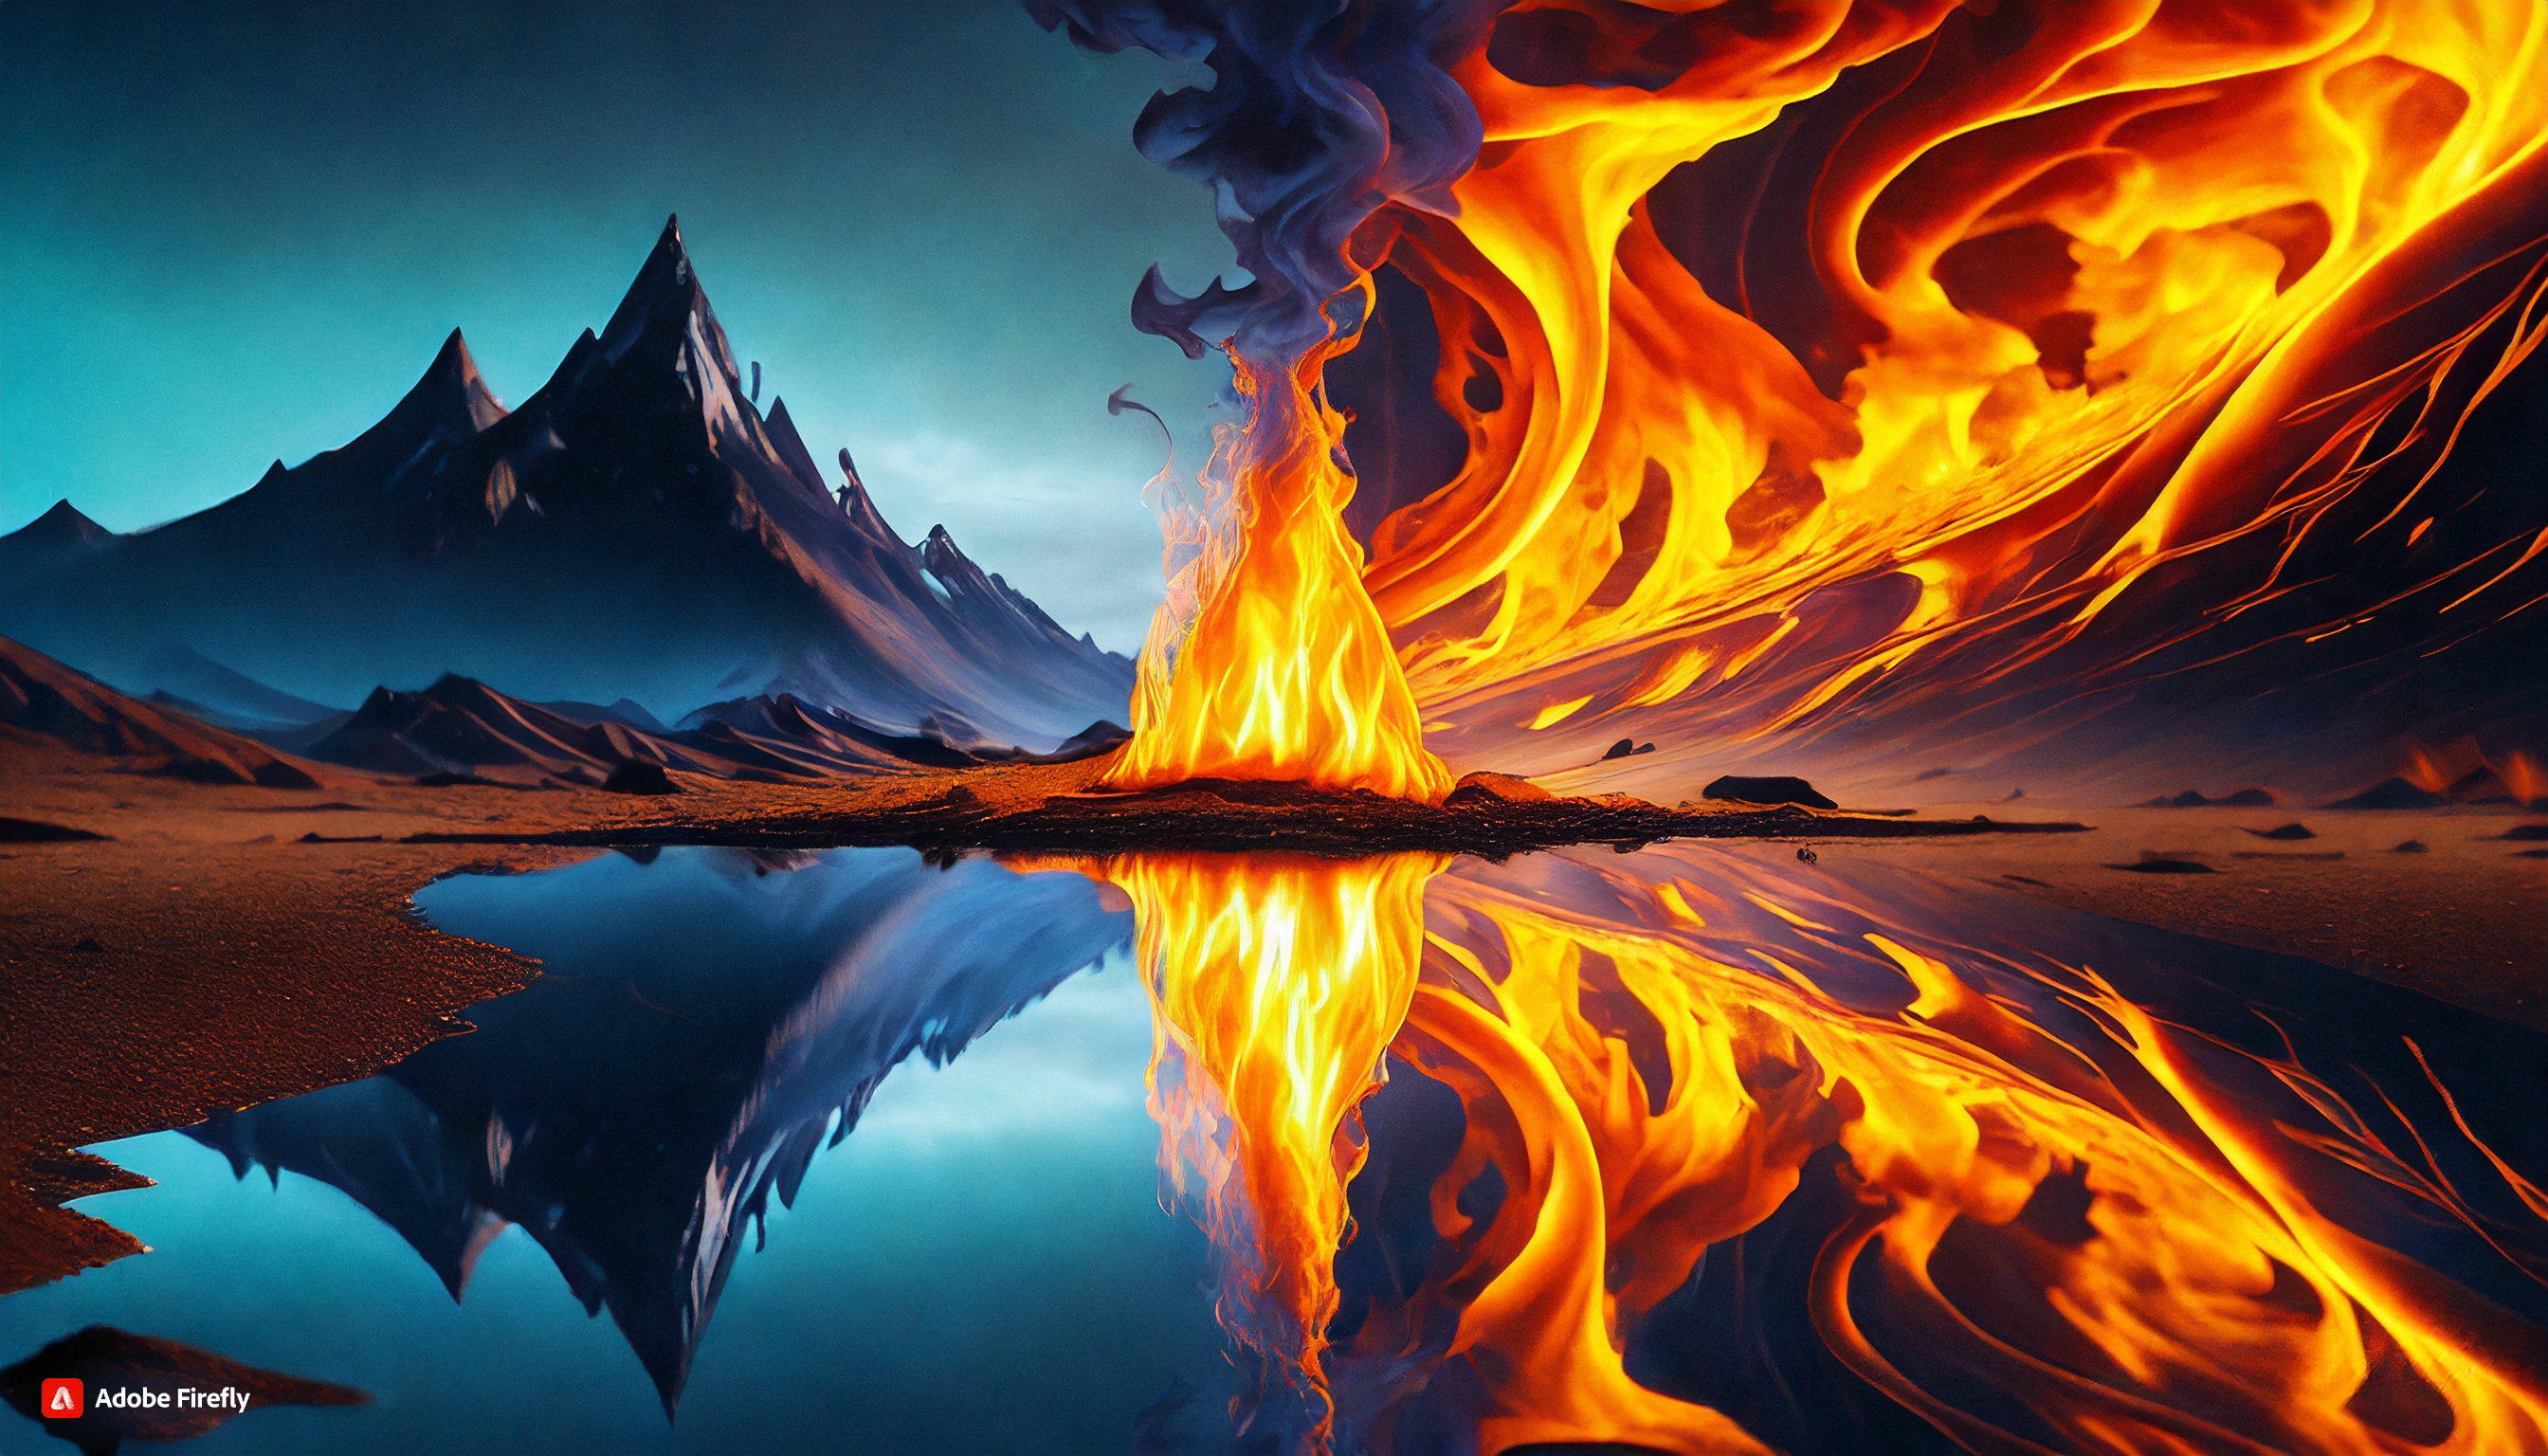 General 2688x1536 Fire and Ice graphic design art of nocula AI art digital art reflection watermarked mountains fire water sky